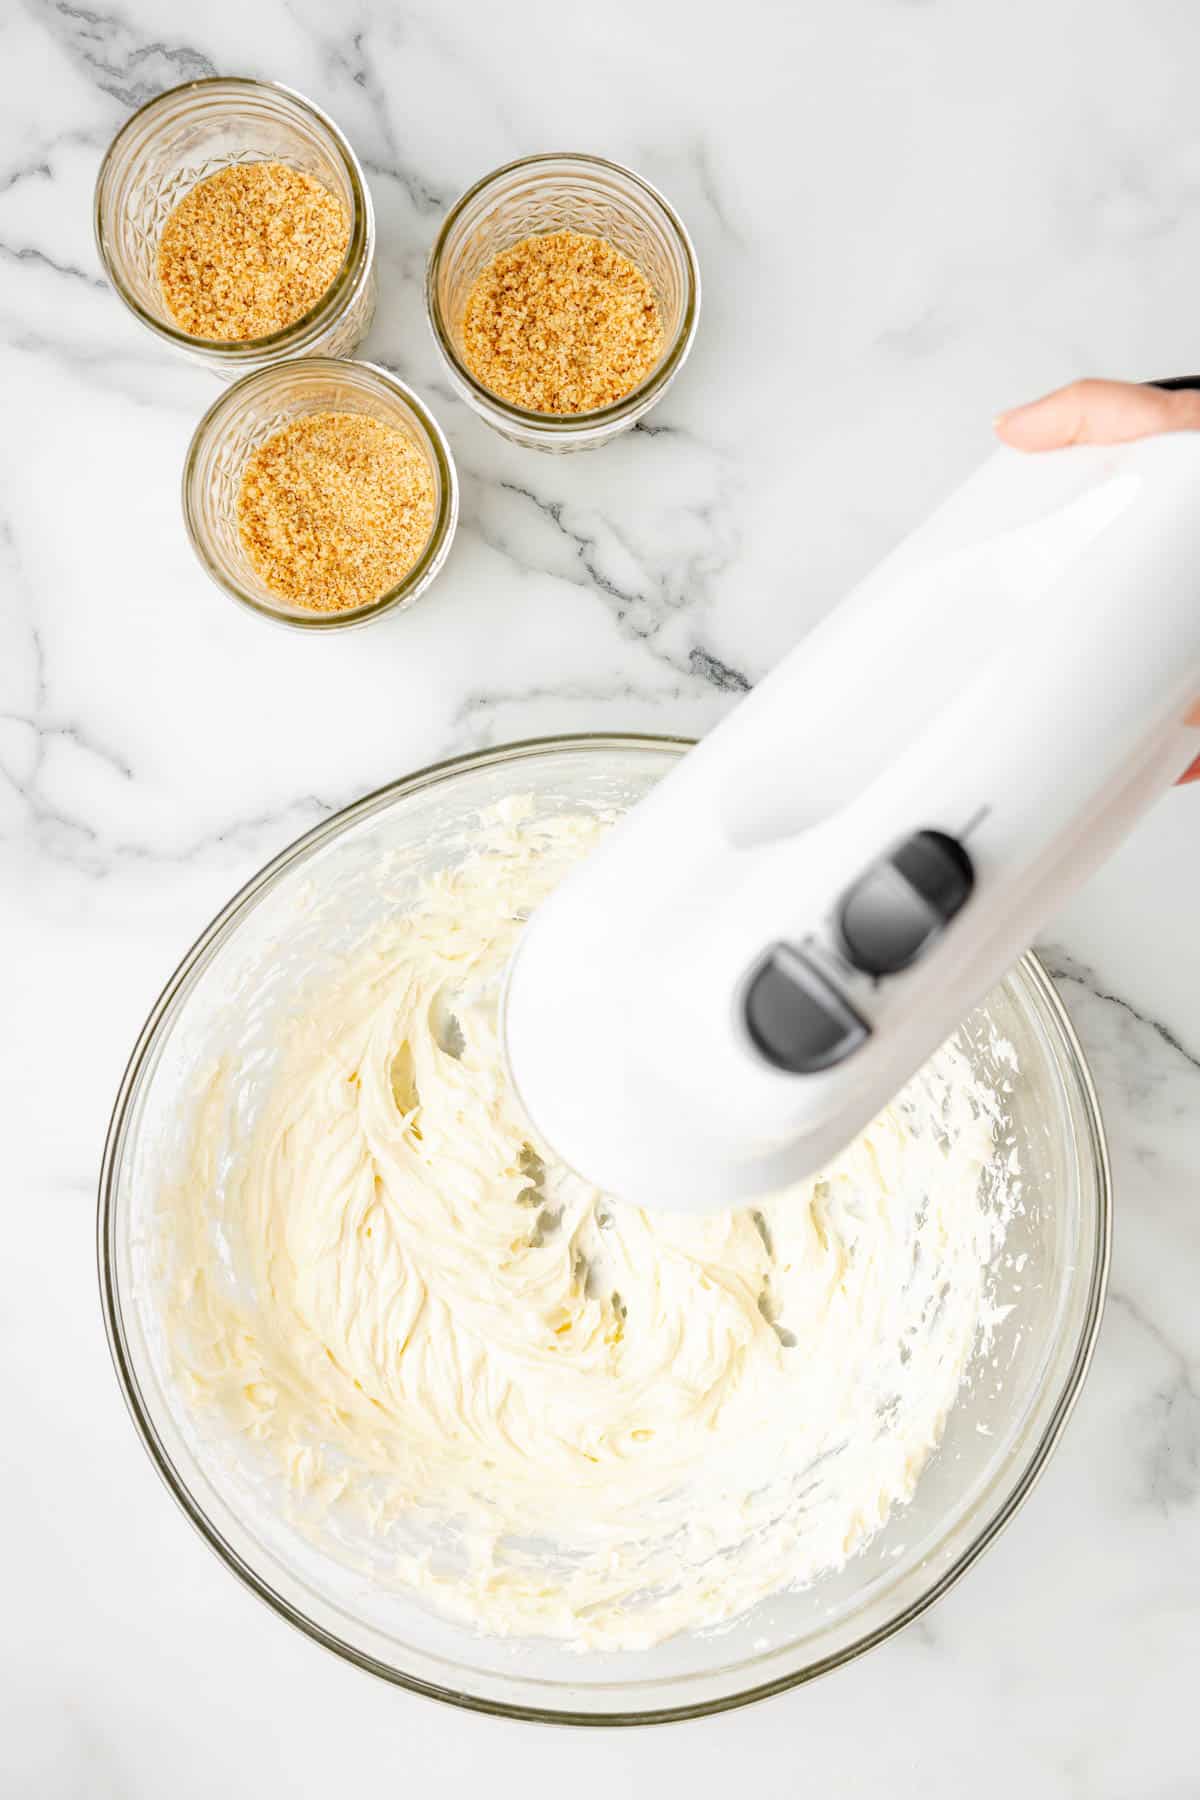 An electric mixer being used to beat cream cheese and sugar until smooth.